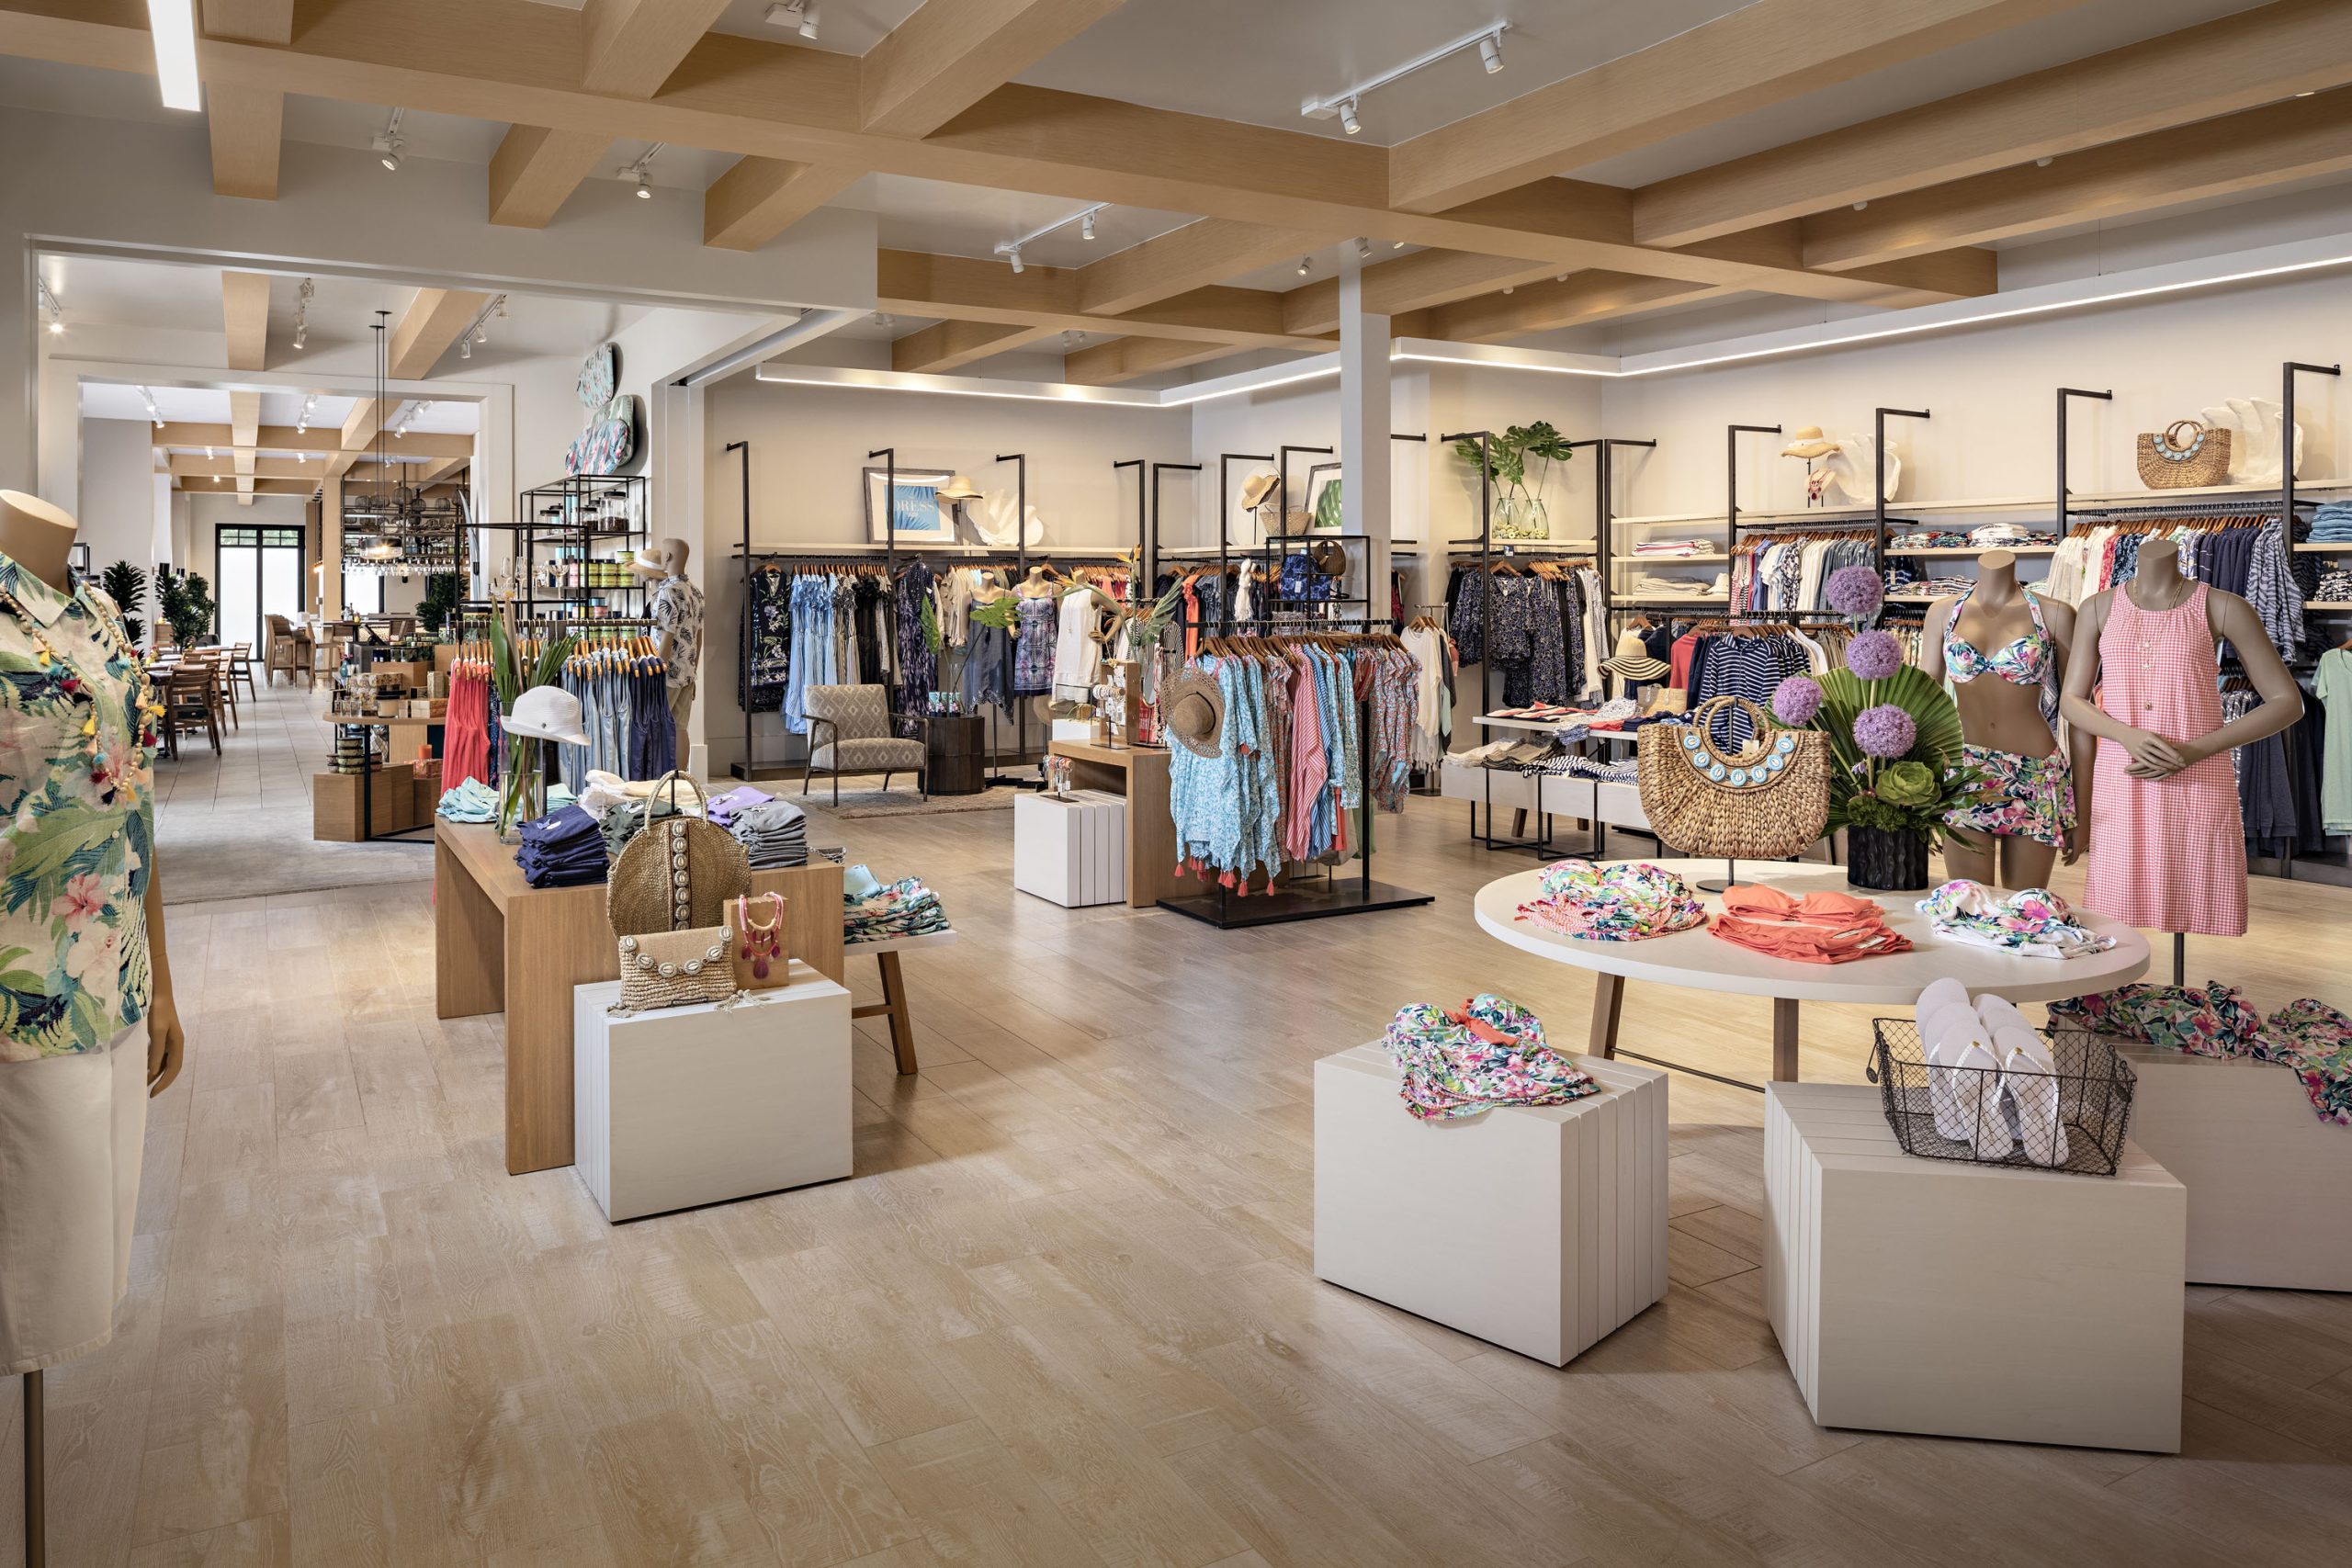 How Tommy Bahama Excels At Retail, Restaurants And Beyond - Local Profile